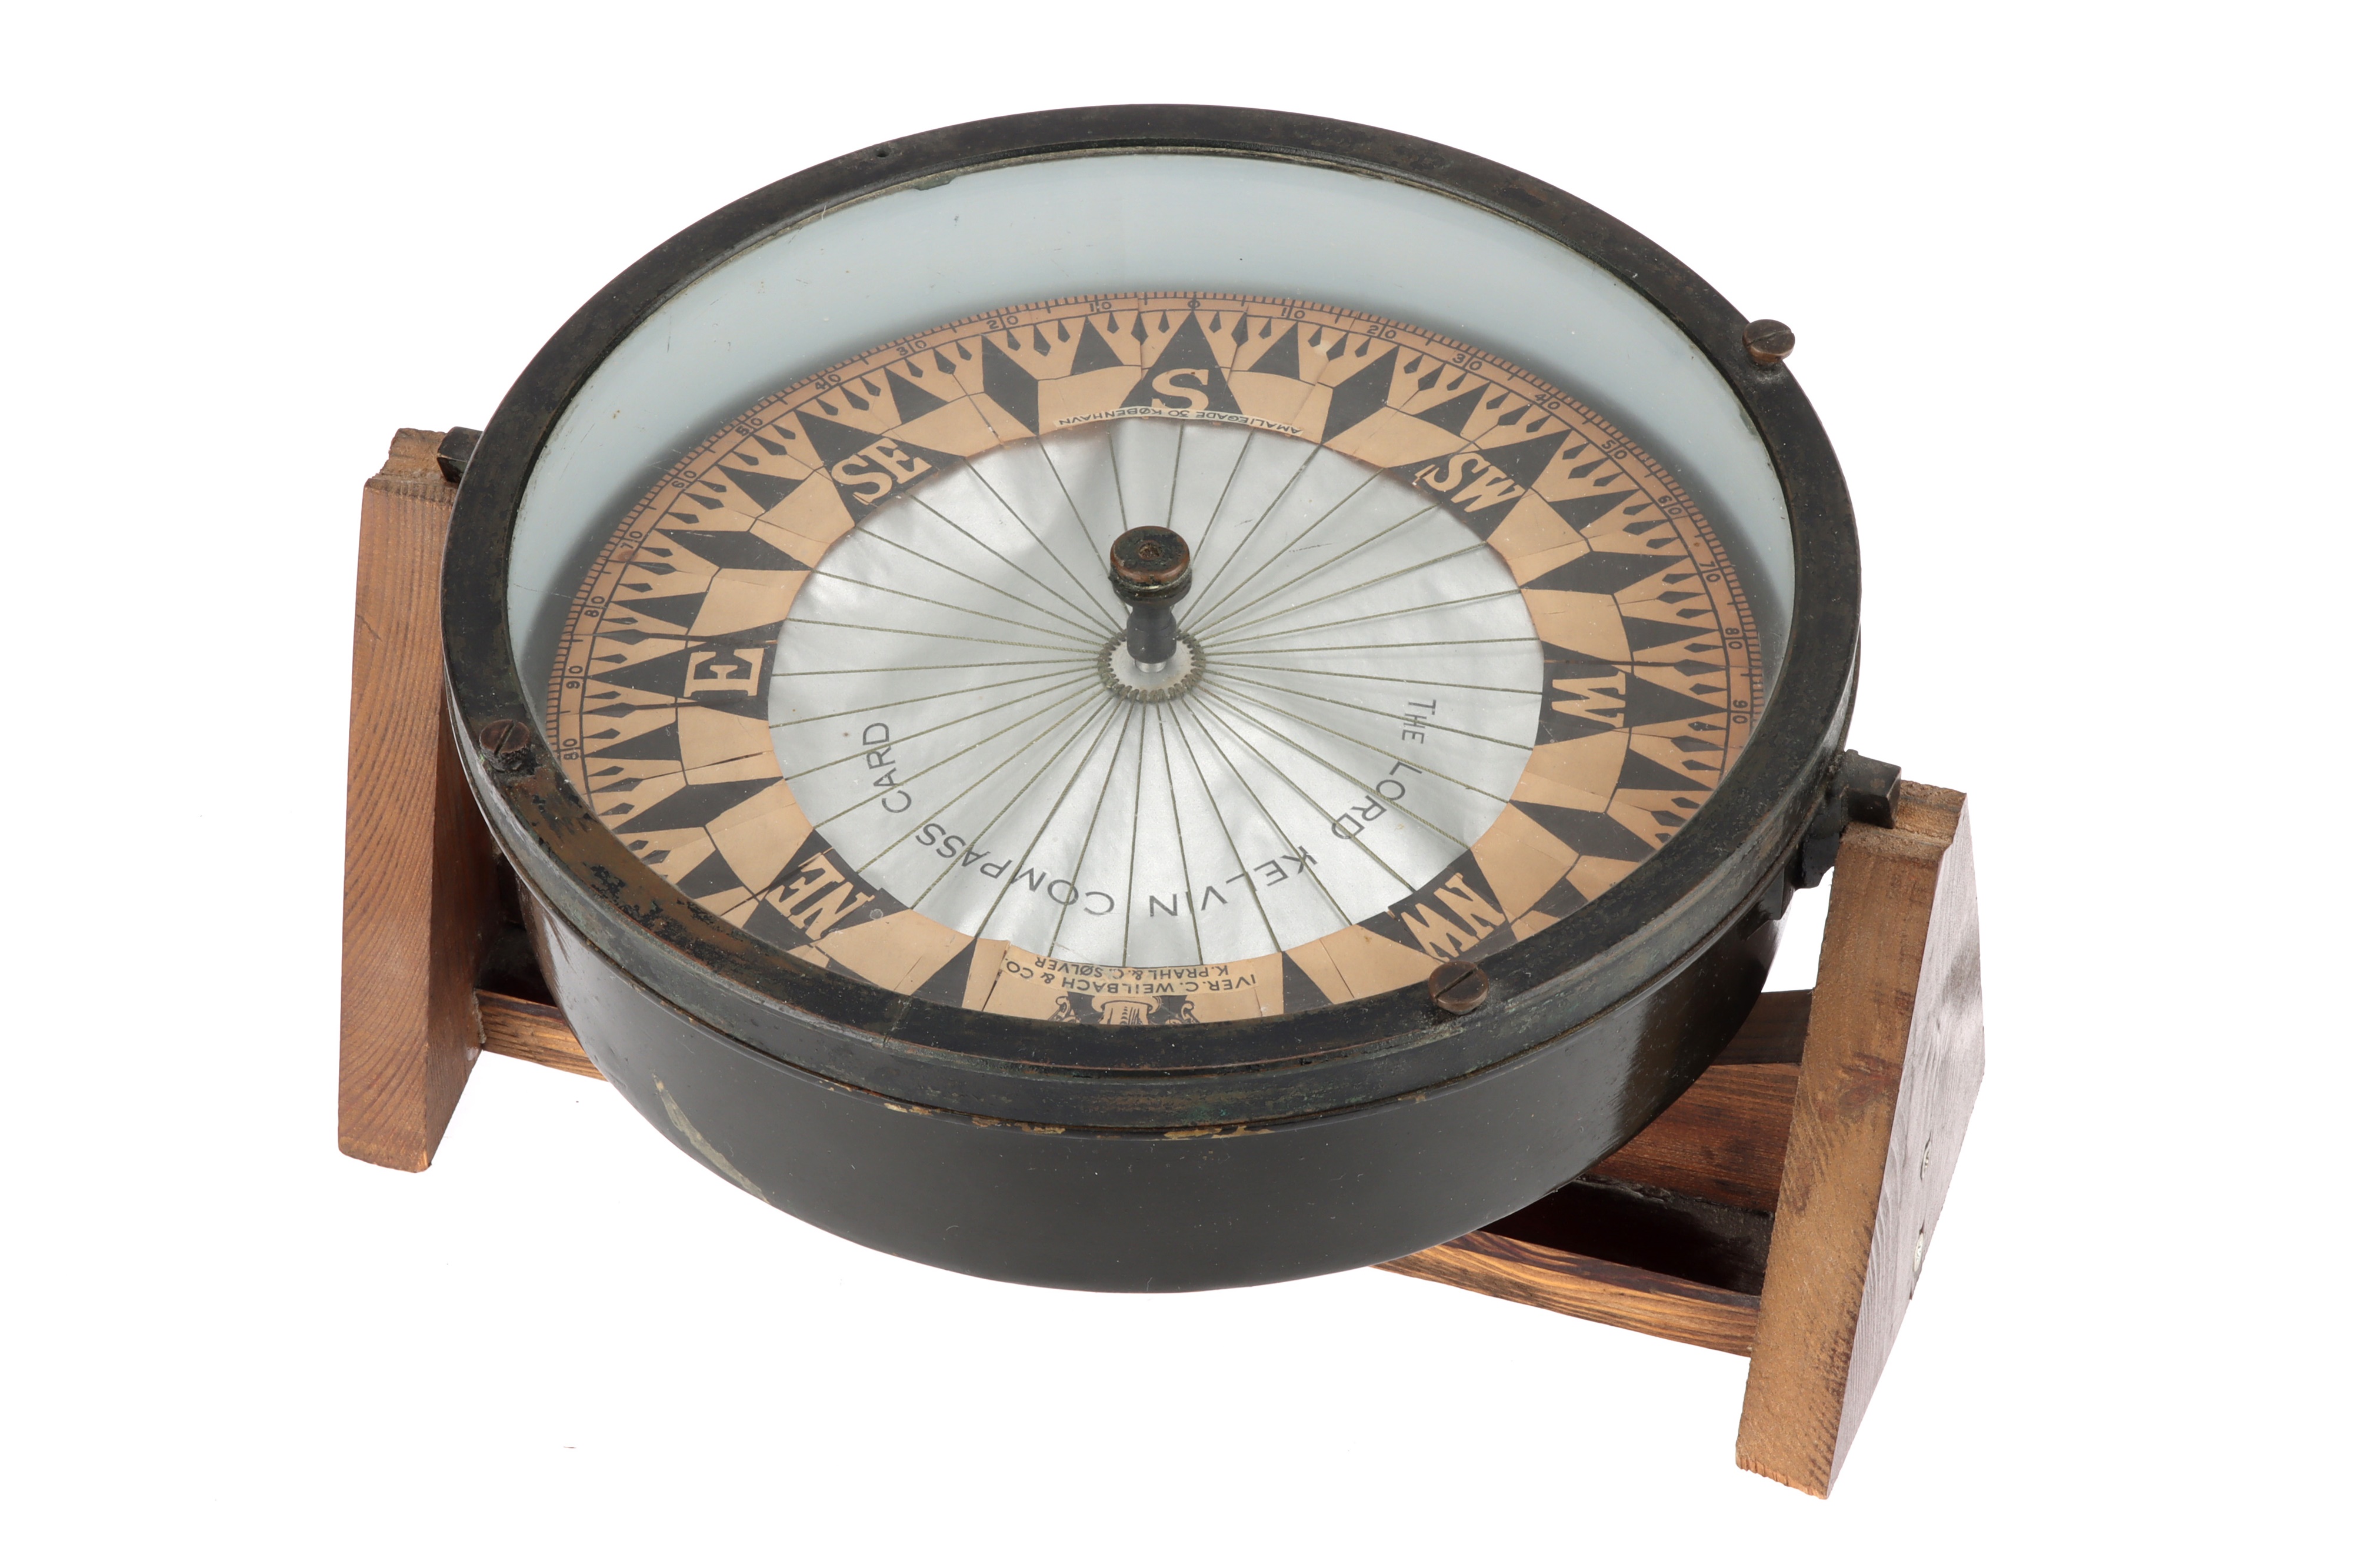 A 9" Dry Card Lord Kelvin Compass,